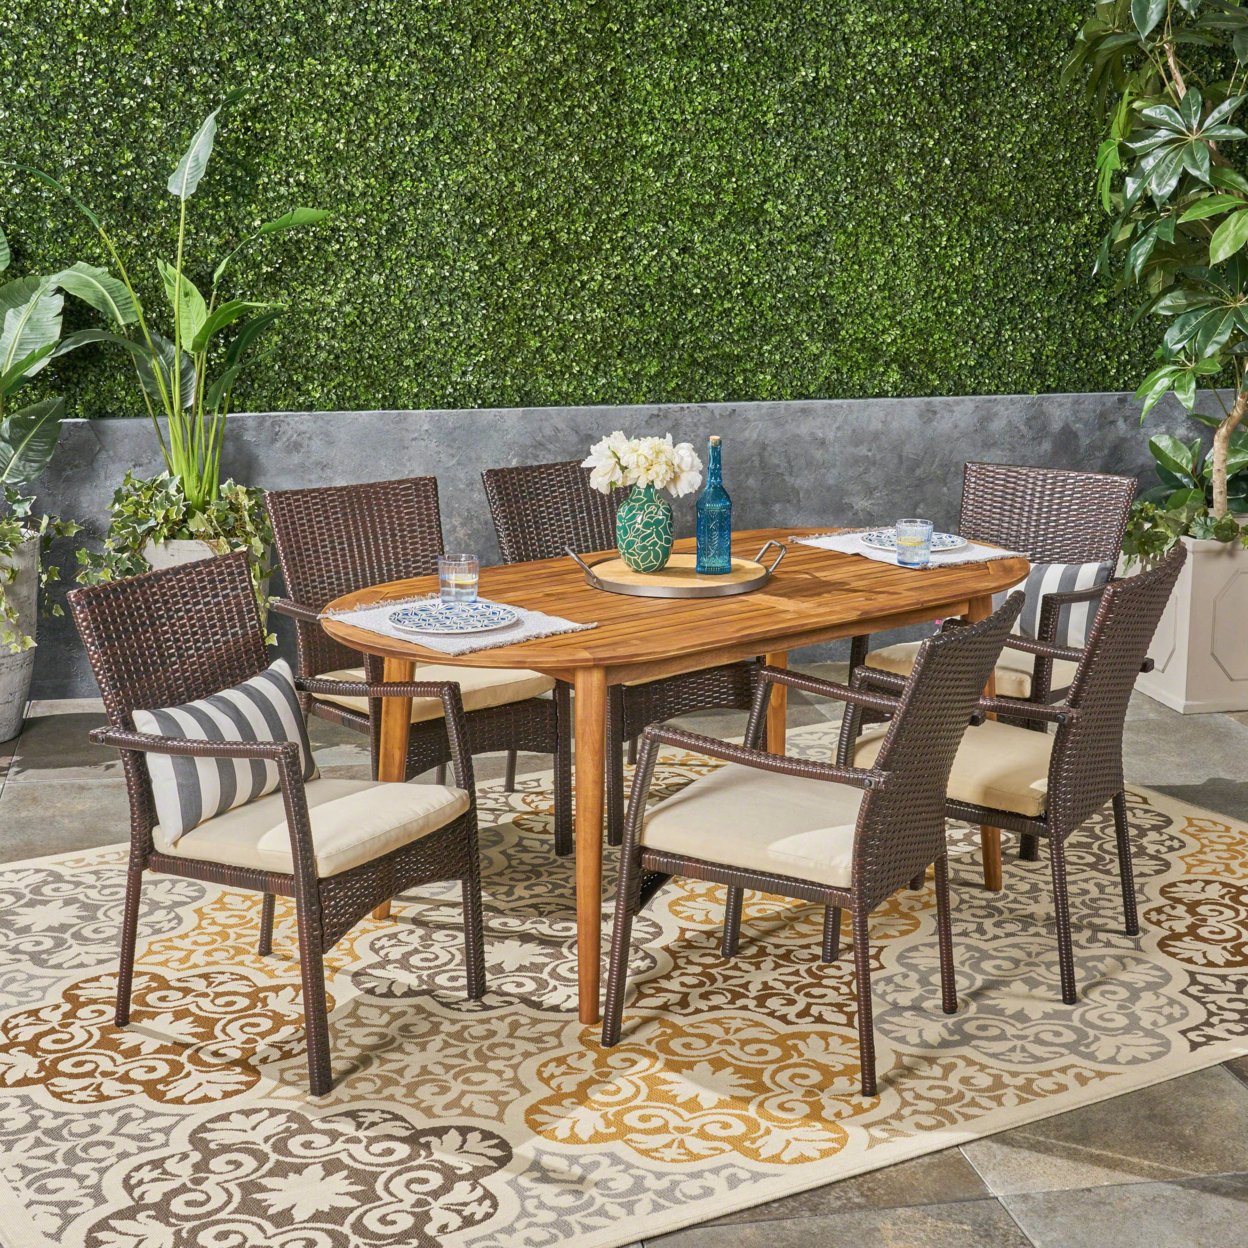 Stanford Outdoor 7-Piece Acacia Wood Dining Set With Wicker Chairs - Teak Finish + Brown + Cream